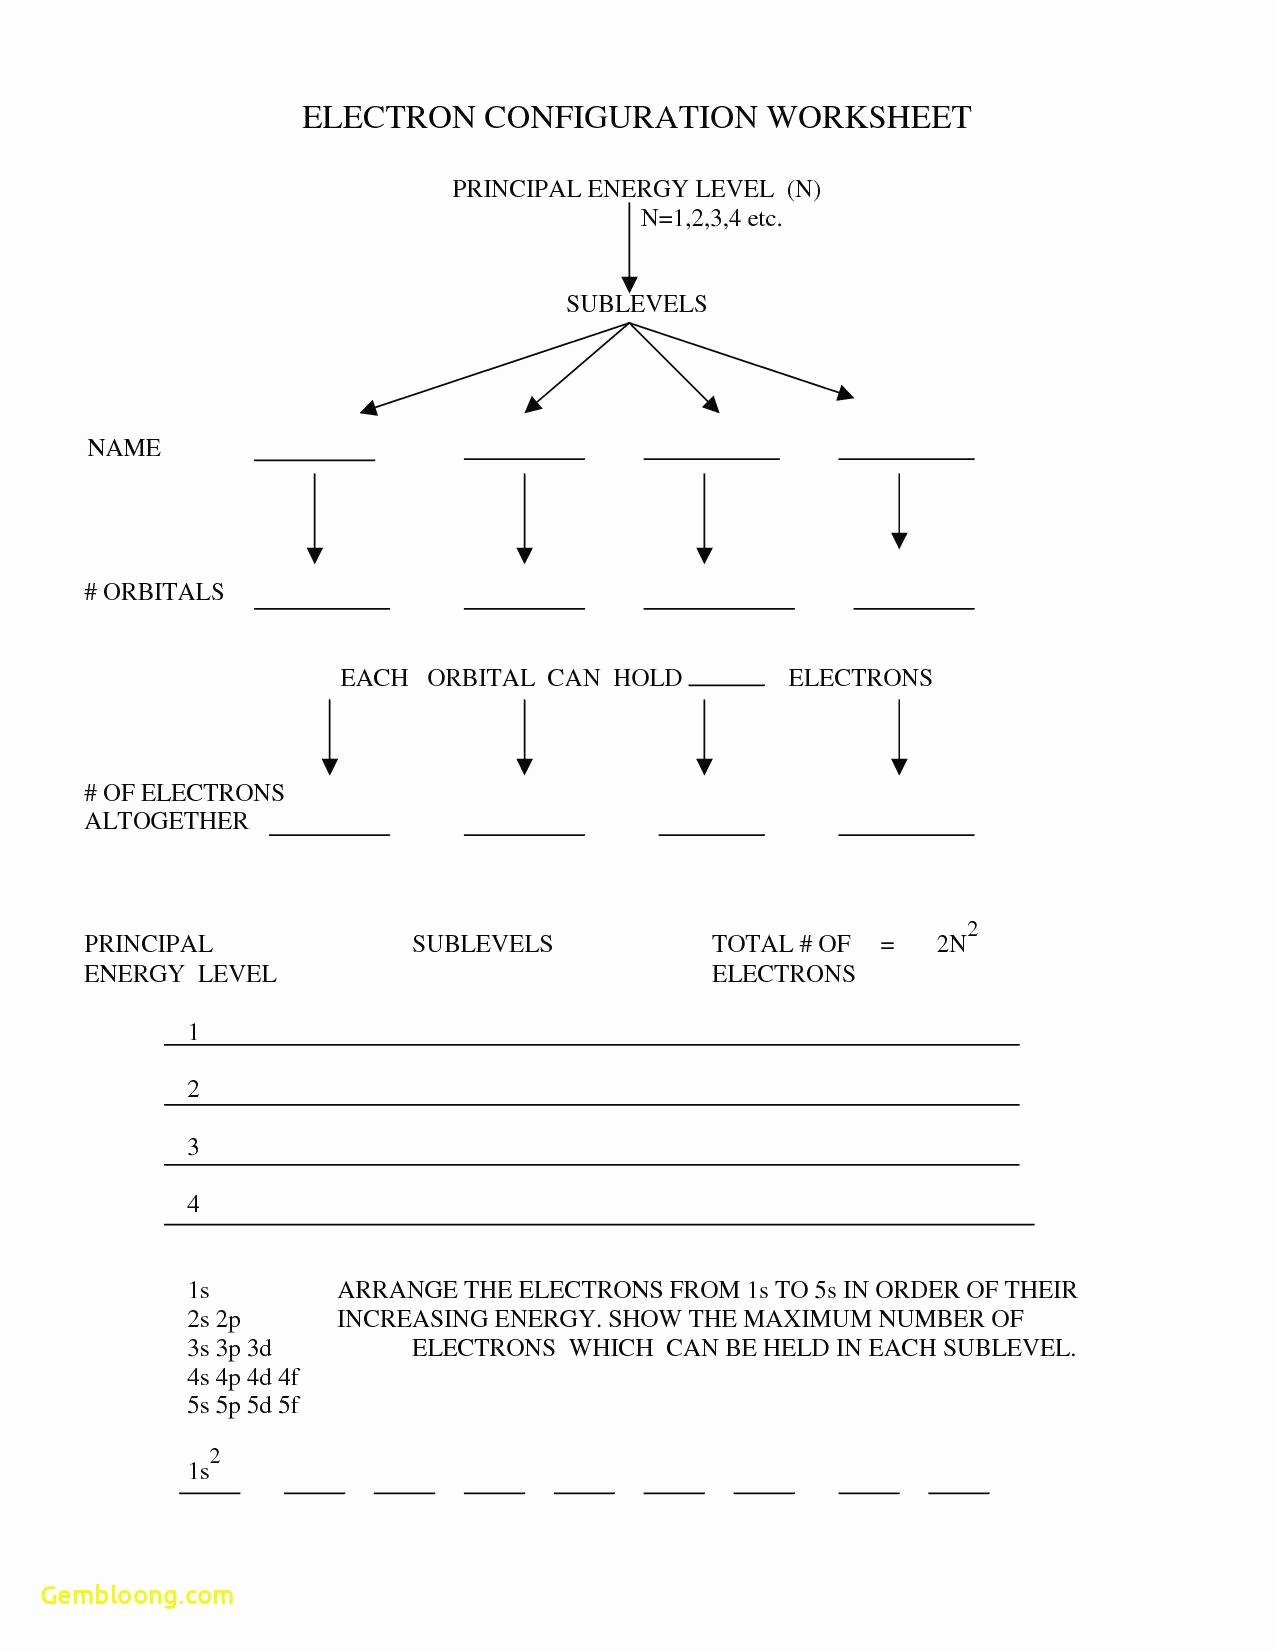 Science 8 Density Calculations Worksheet New Science 8 Density Calculations Worksheet